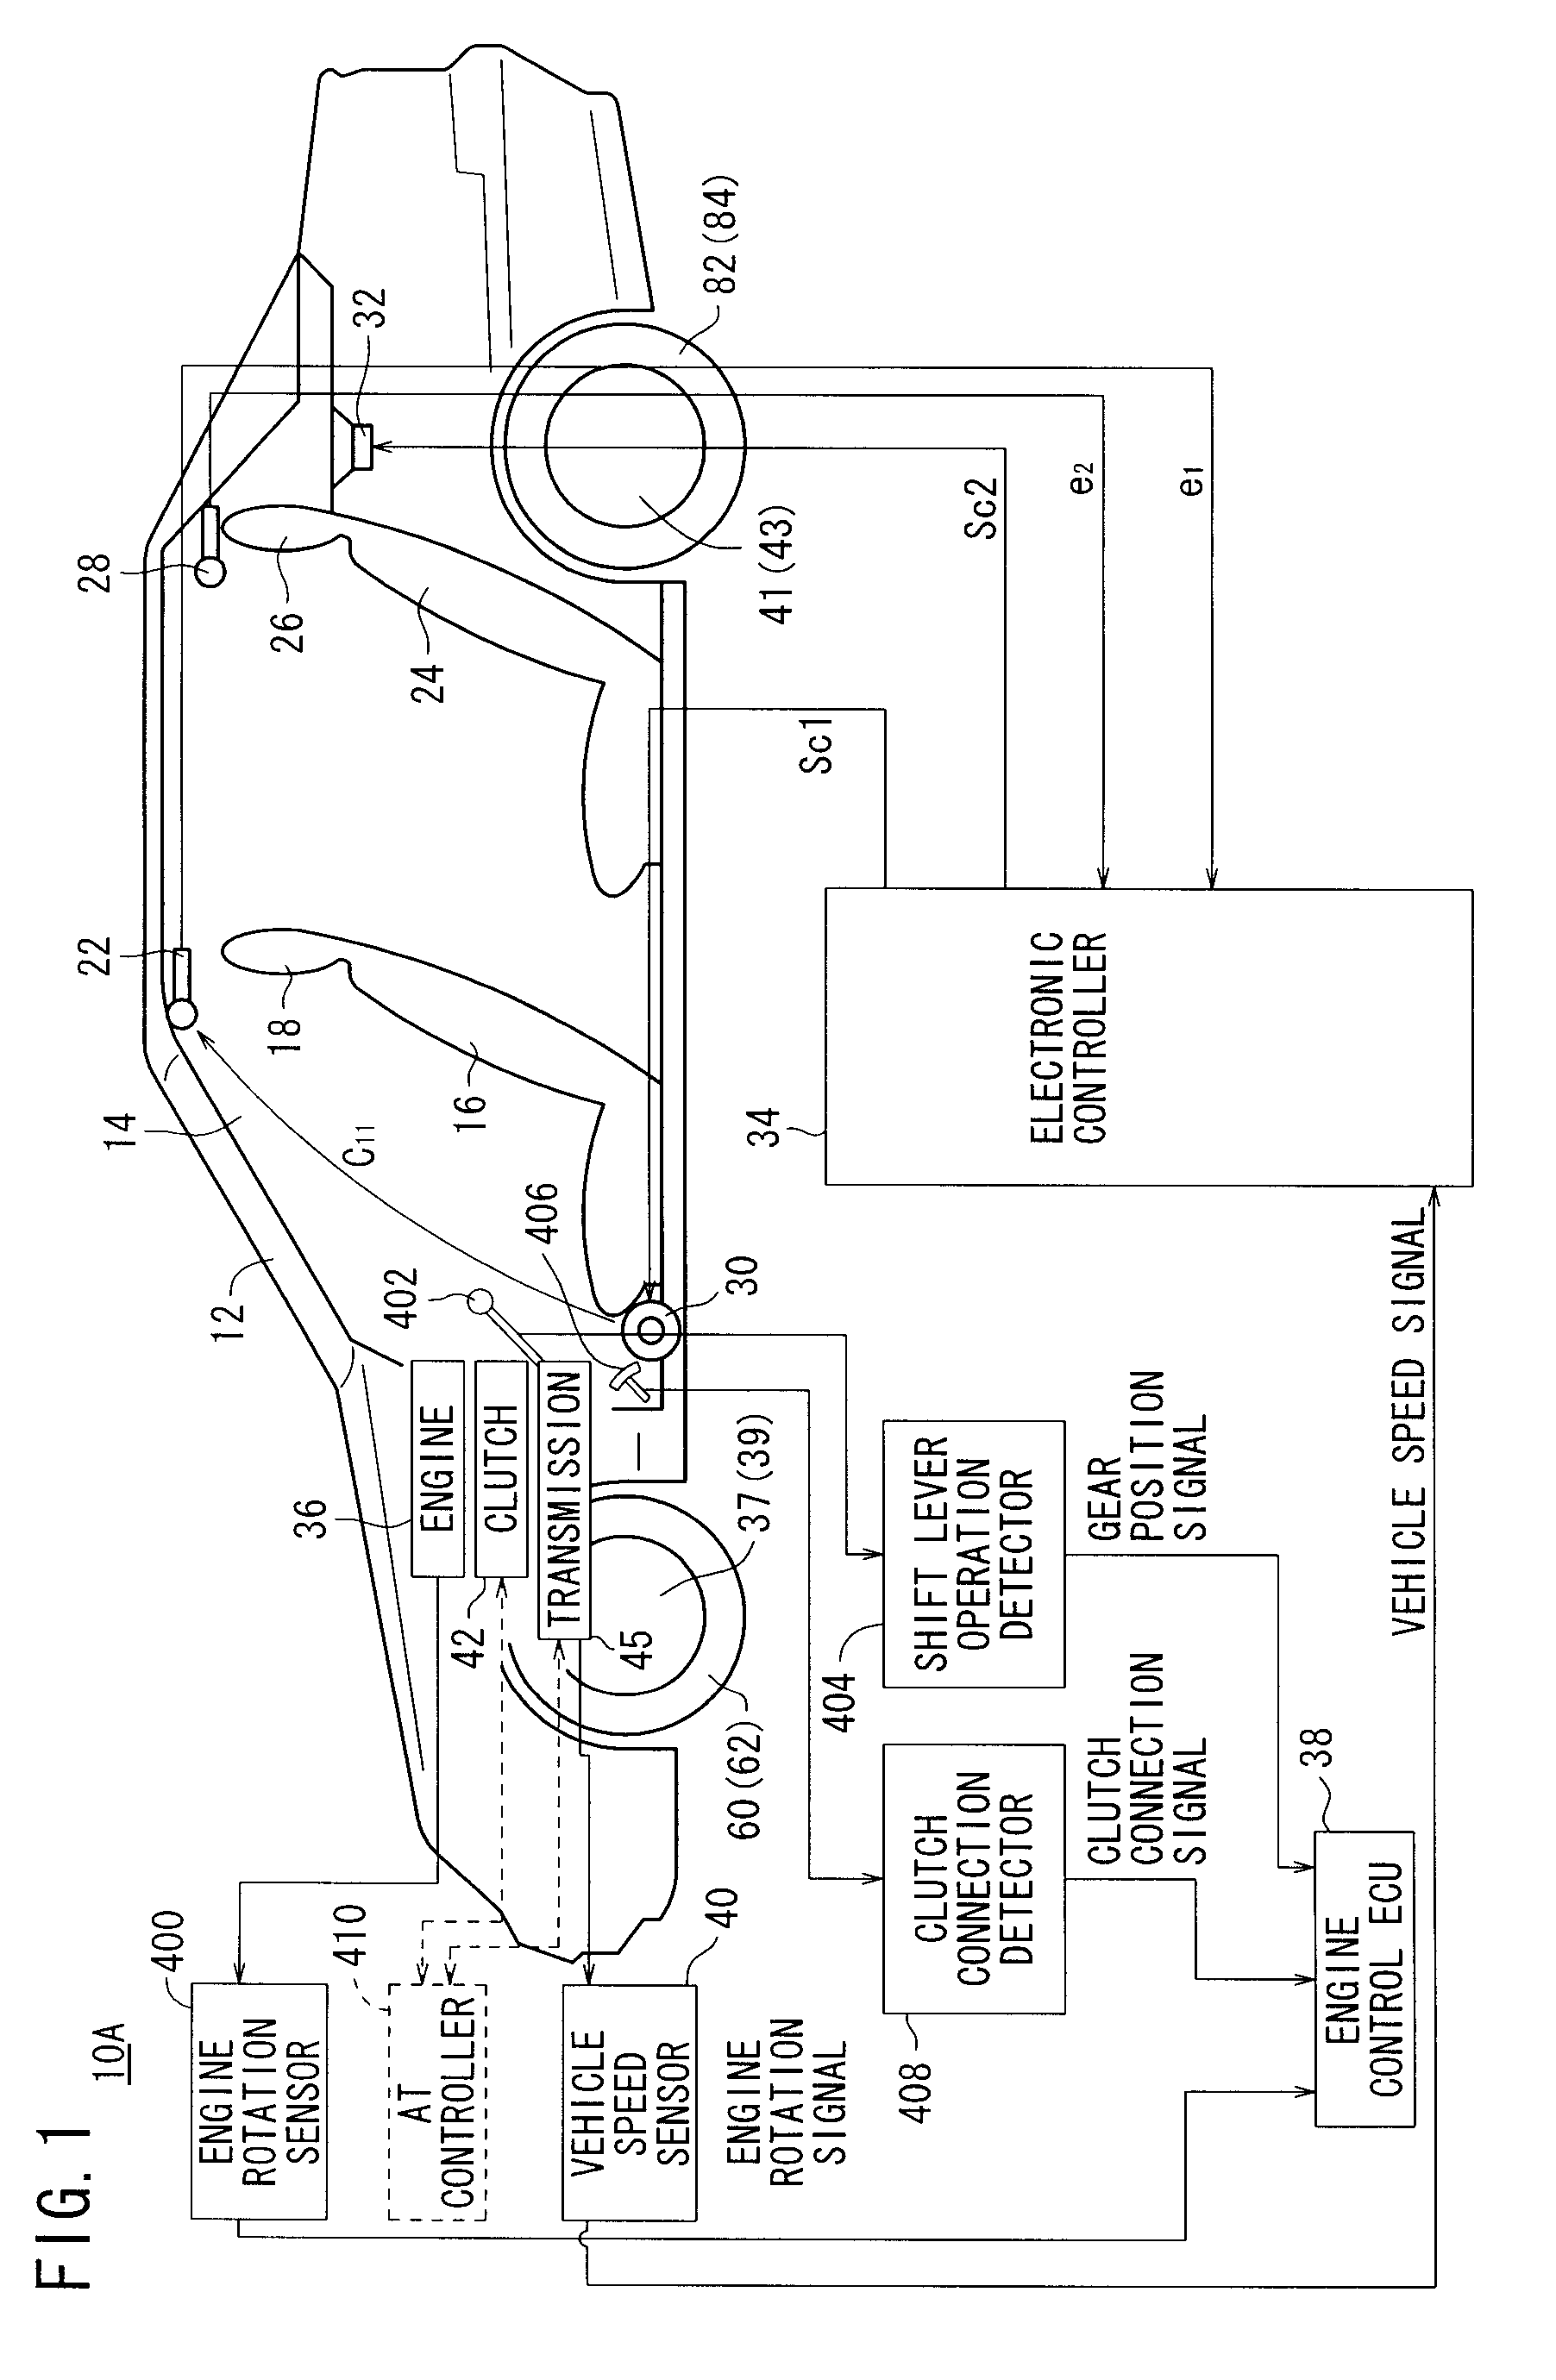 Vehicular active noise control system